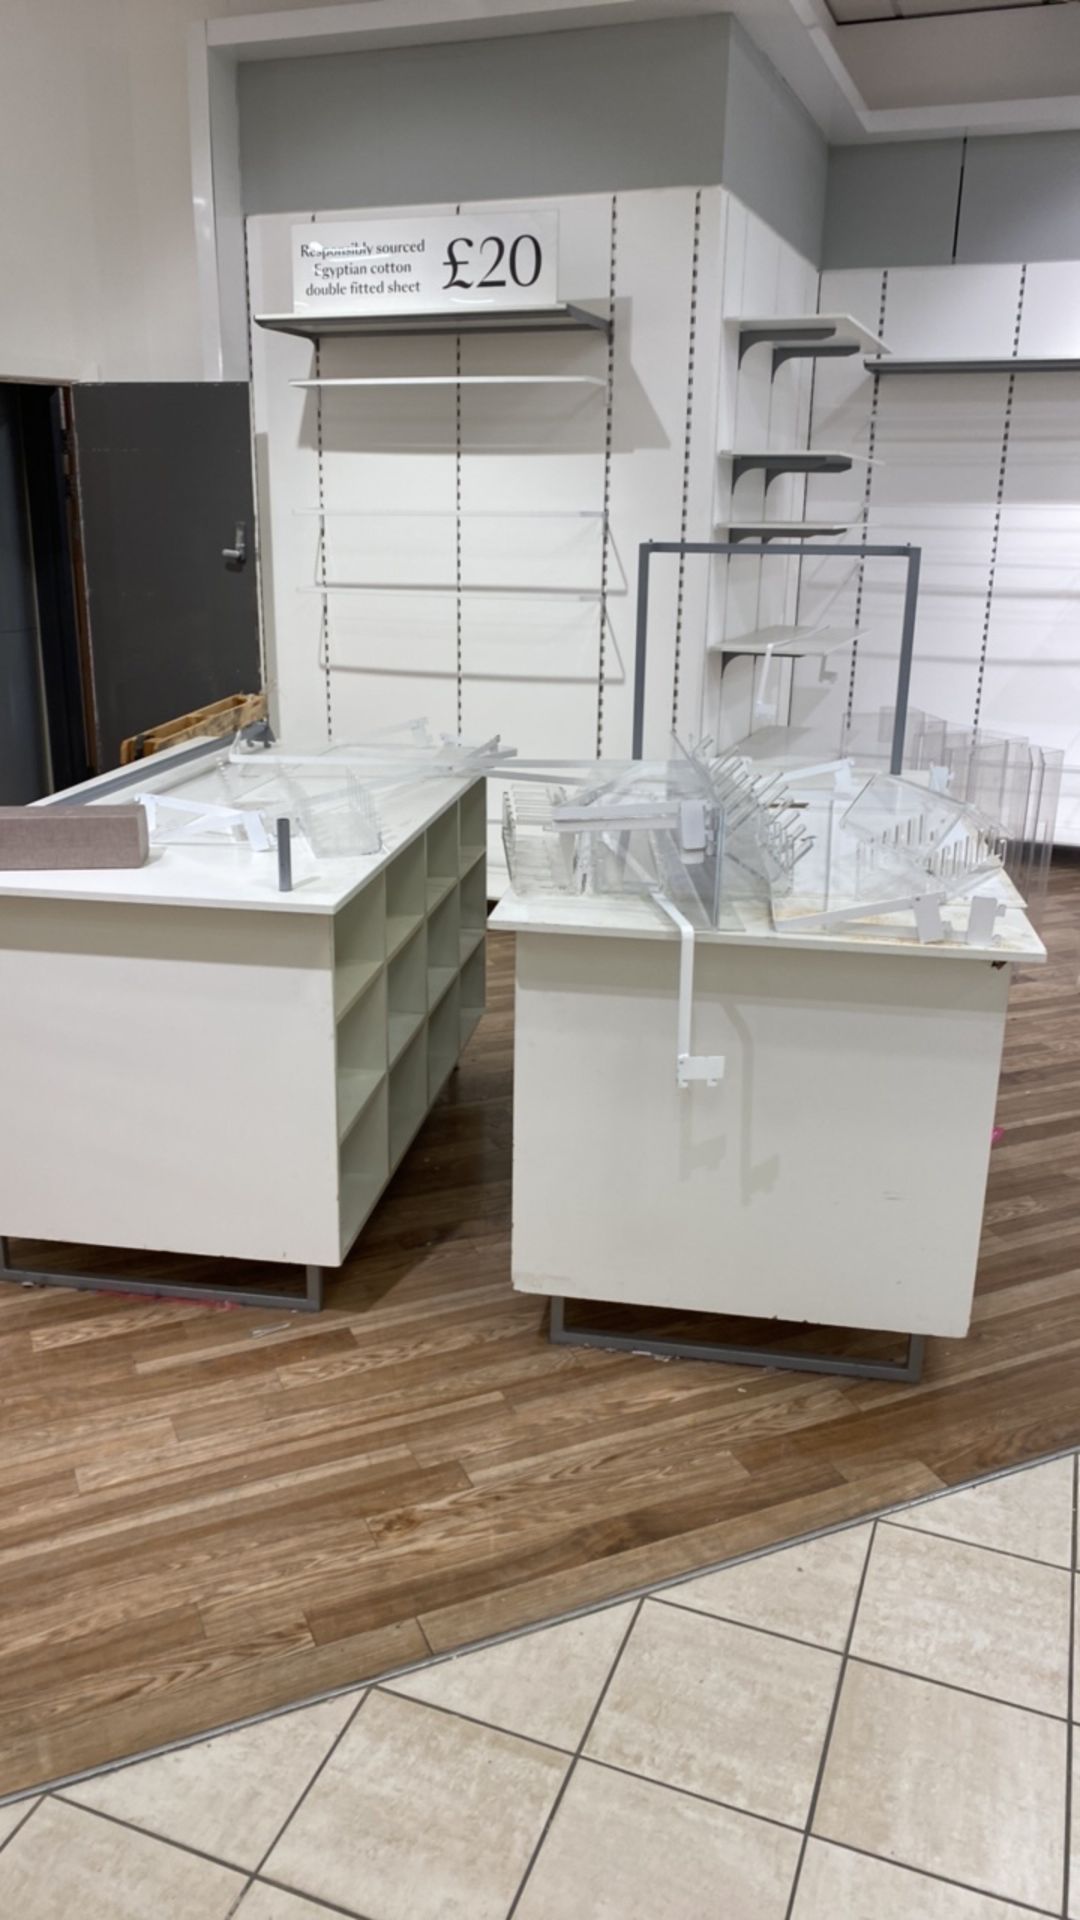 2x Retail Display White Wooden Cabinets